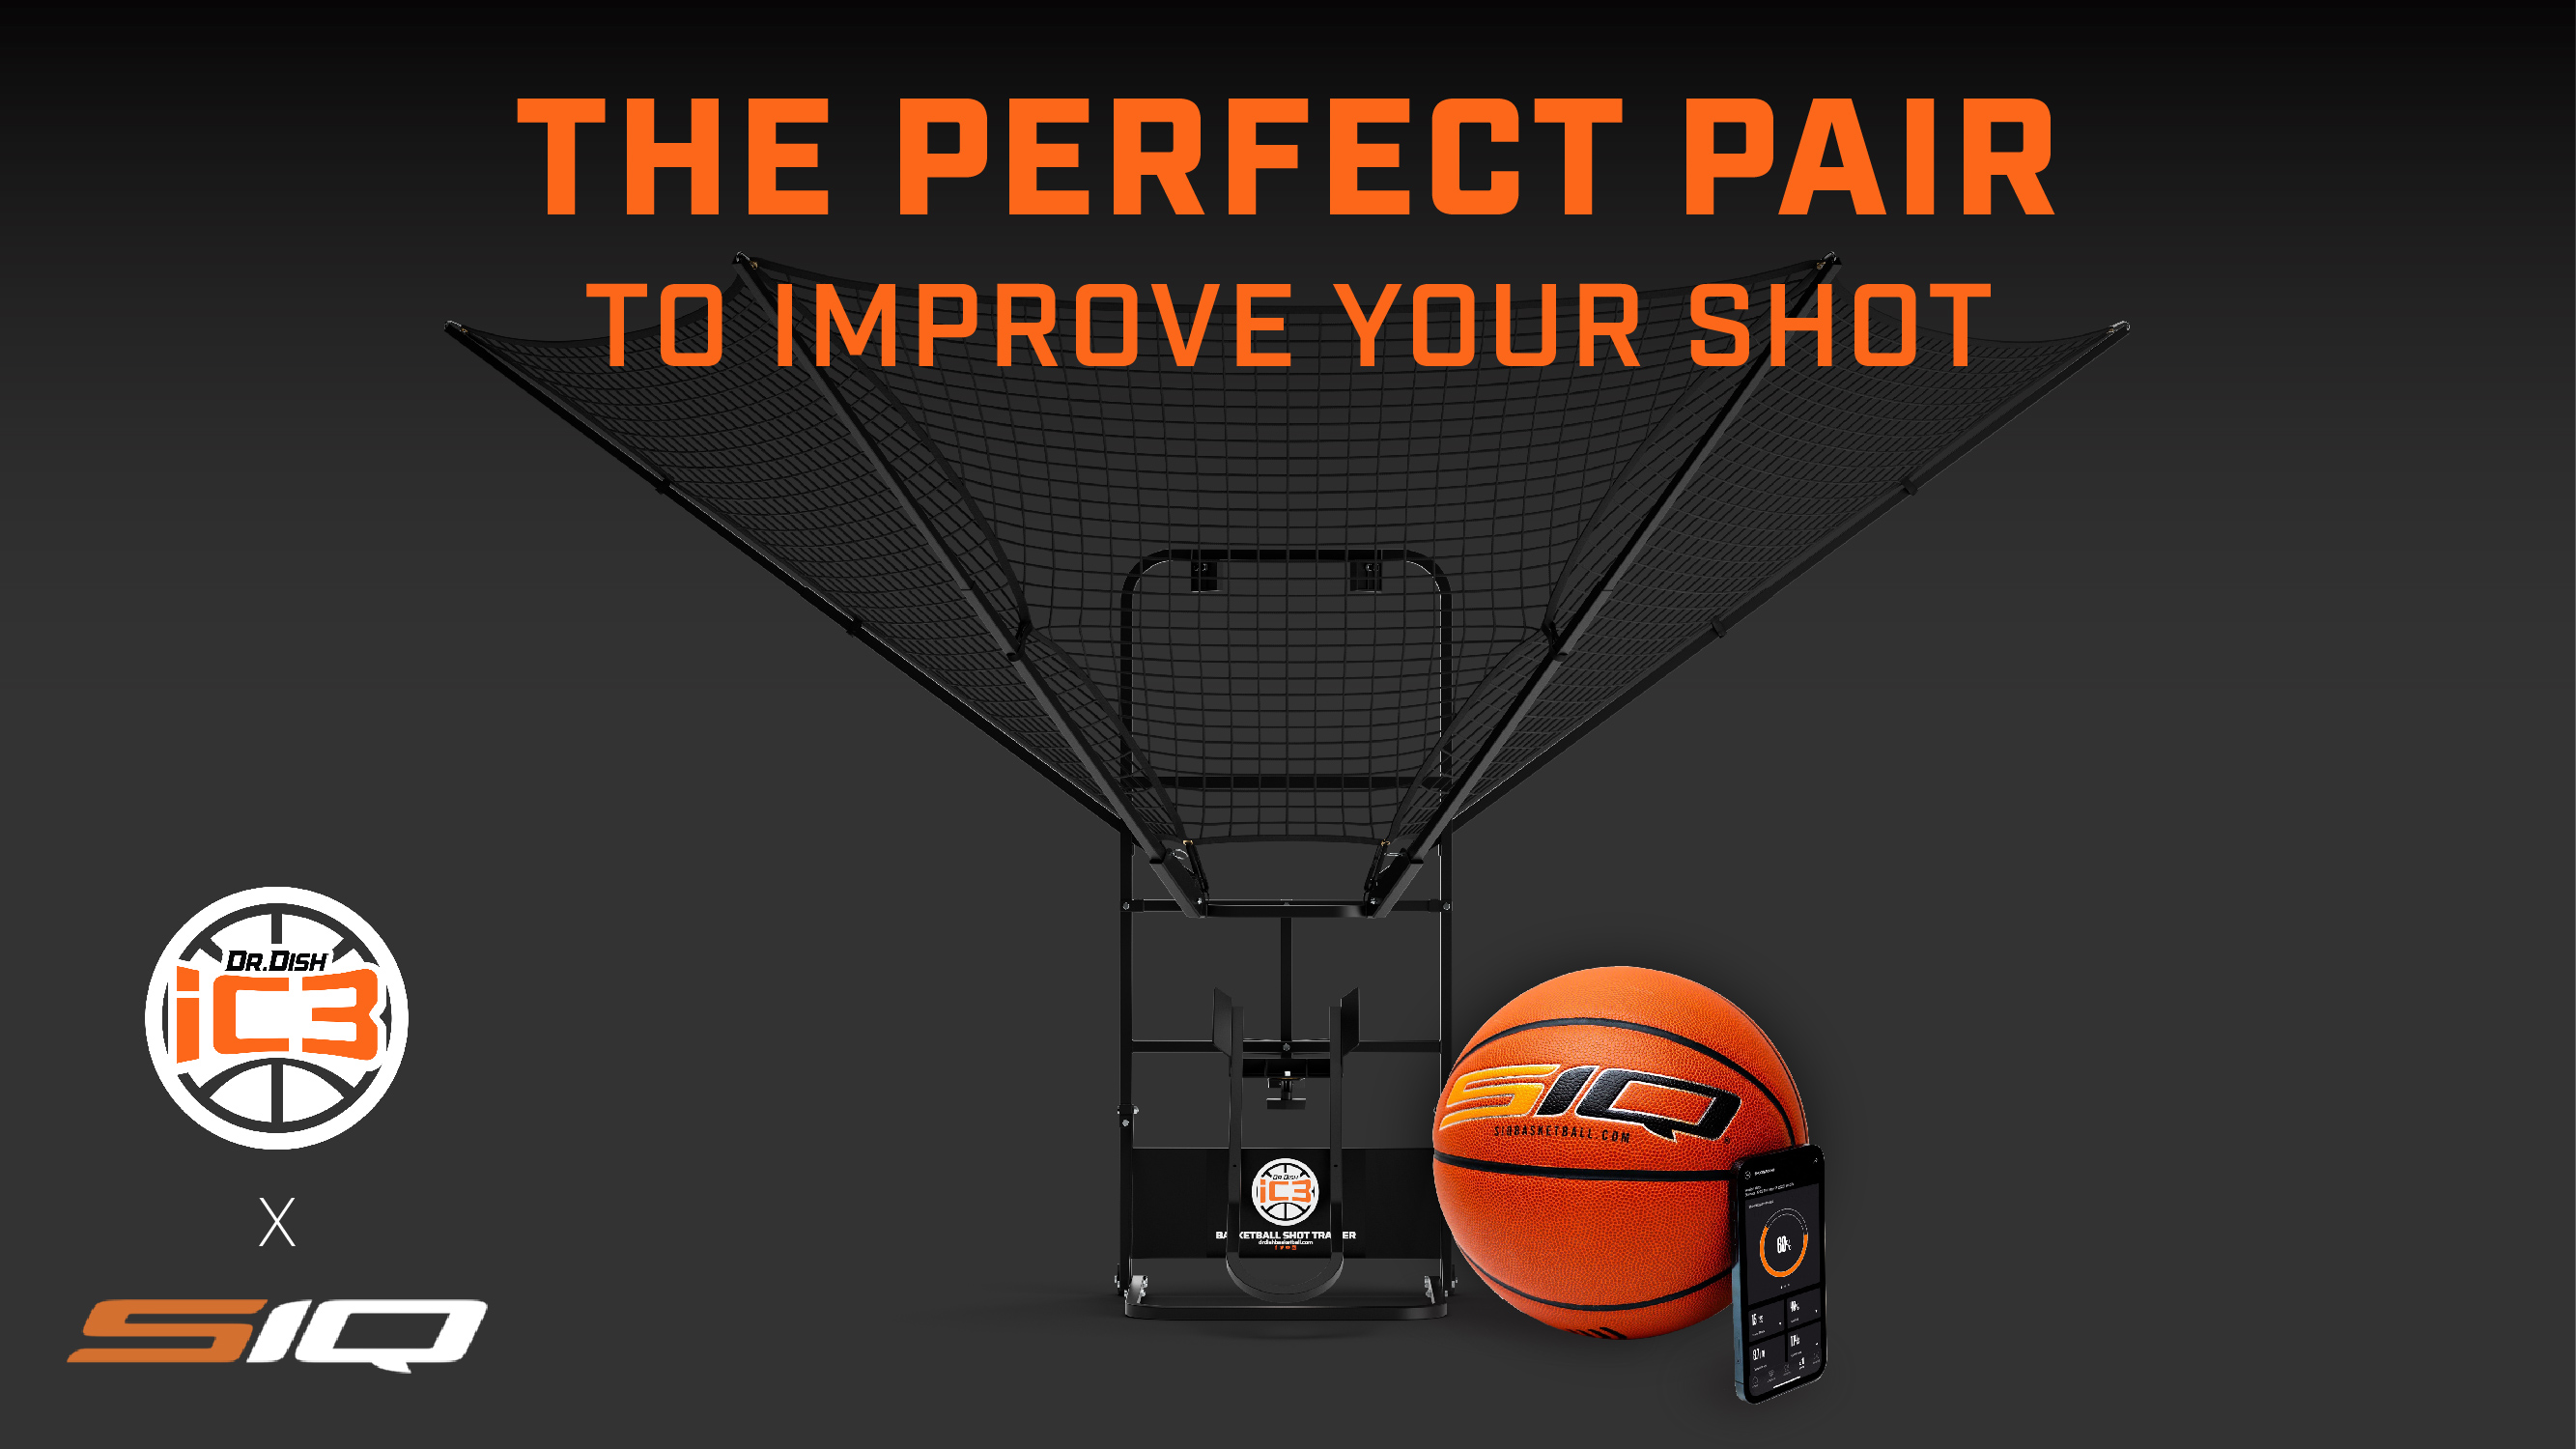 Dr. Dish iC3 and SIQ Smart basketball Make the Perfect Pair to Improve Your Shot